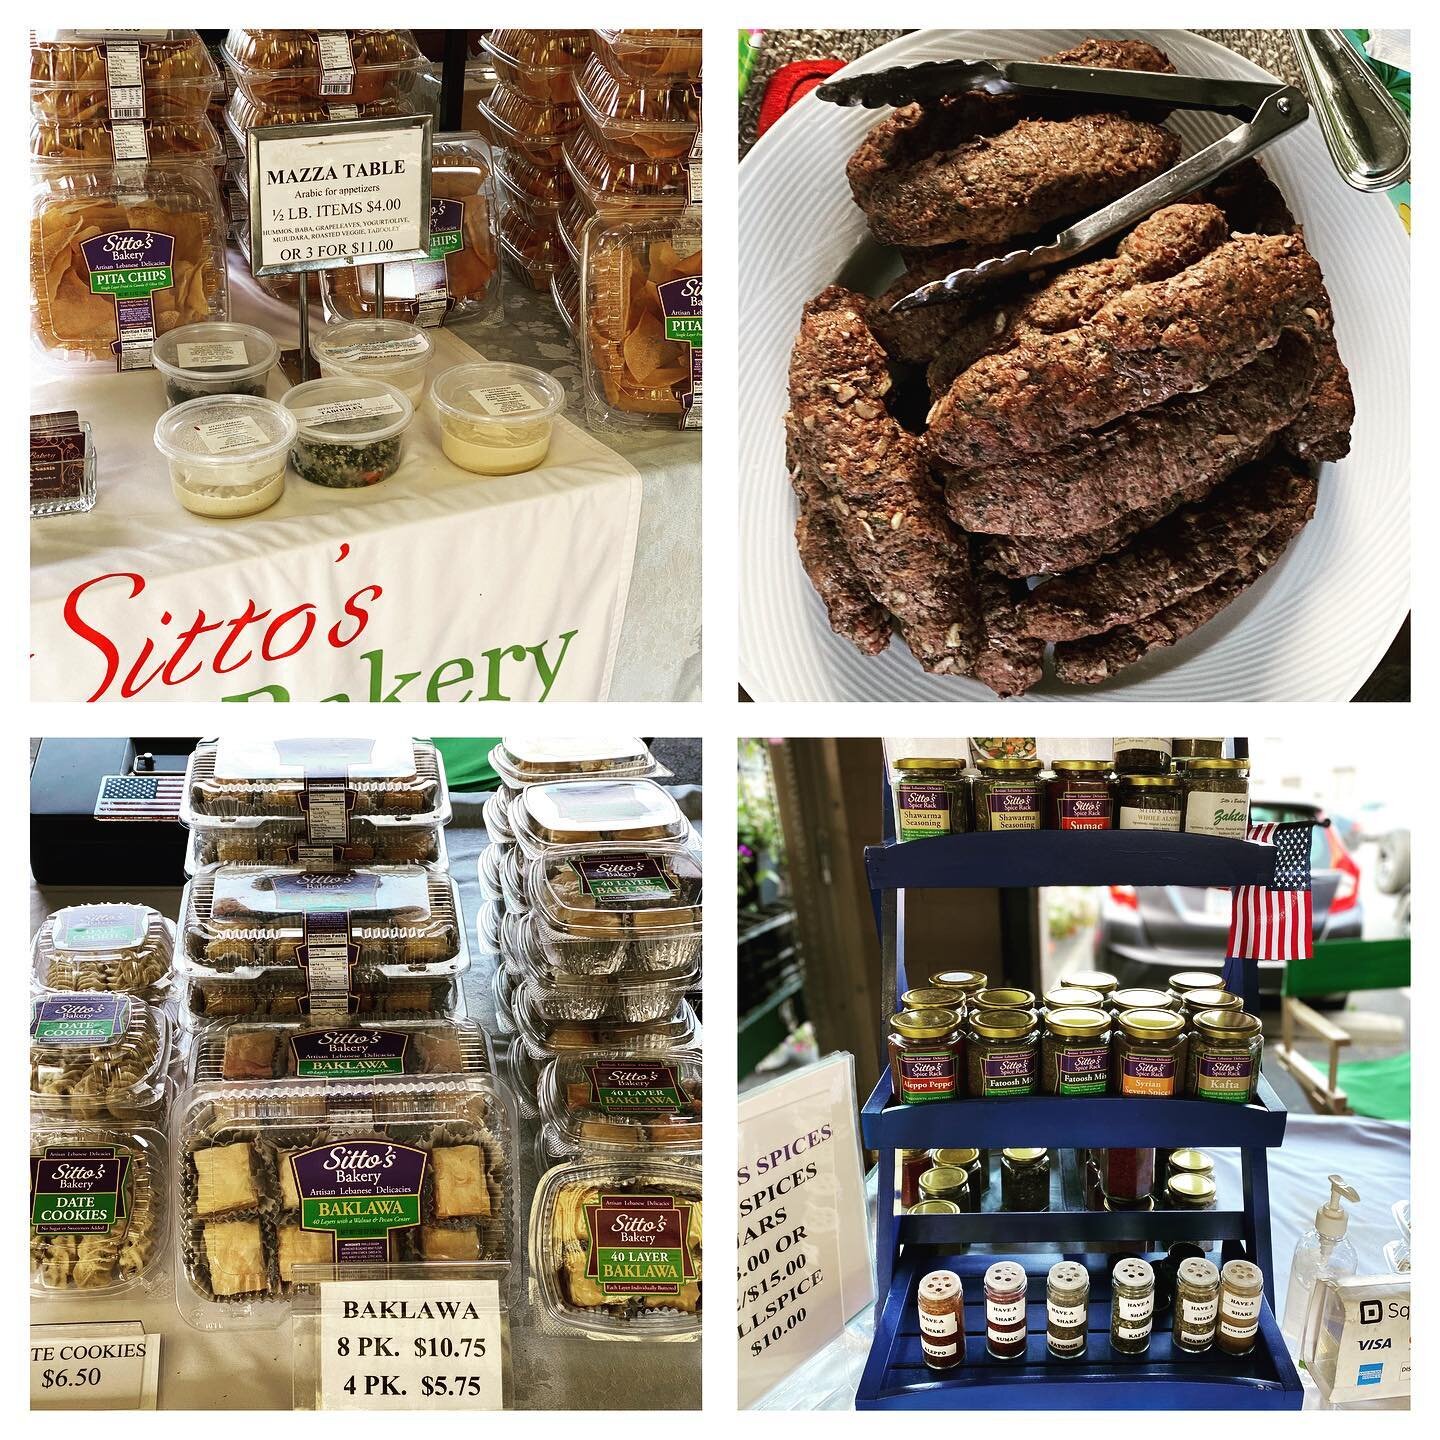 SITTO&rsquo;S BAKERY &amp; SPICES RACK has just what you need for school lunches, dinner, work lunches, tailgate, etc. You need it Sitto&rsquo;s has it for you.  Westgate farmers market today 3pm 7pm.  See you soon!
#toledofarmersmarket